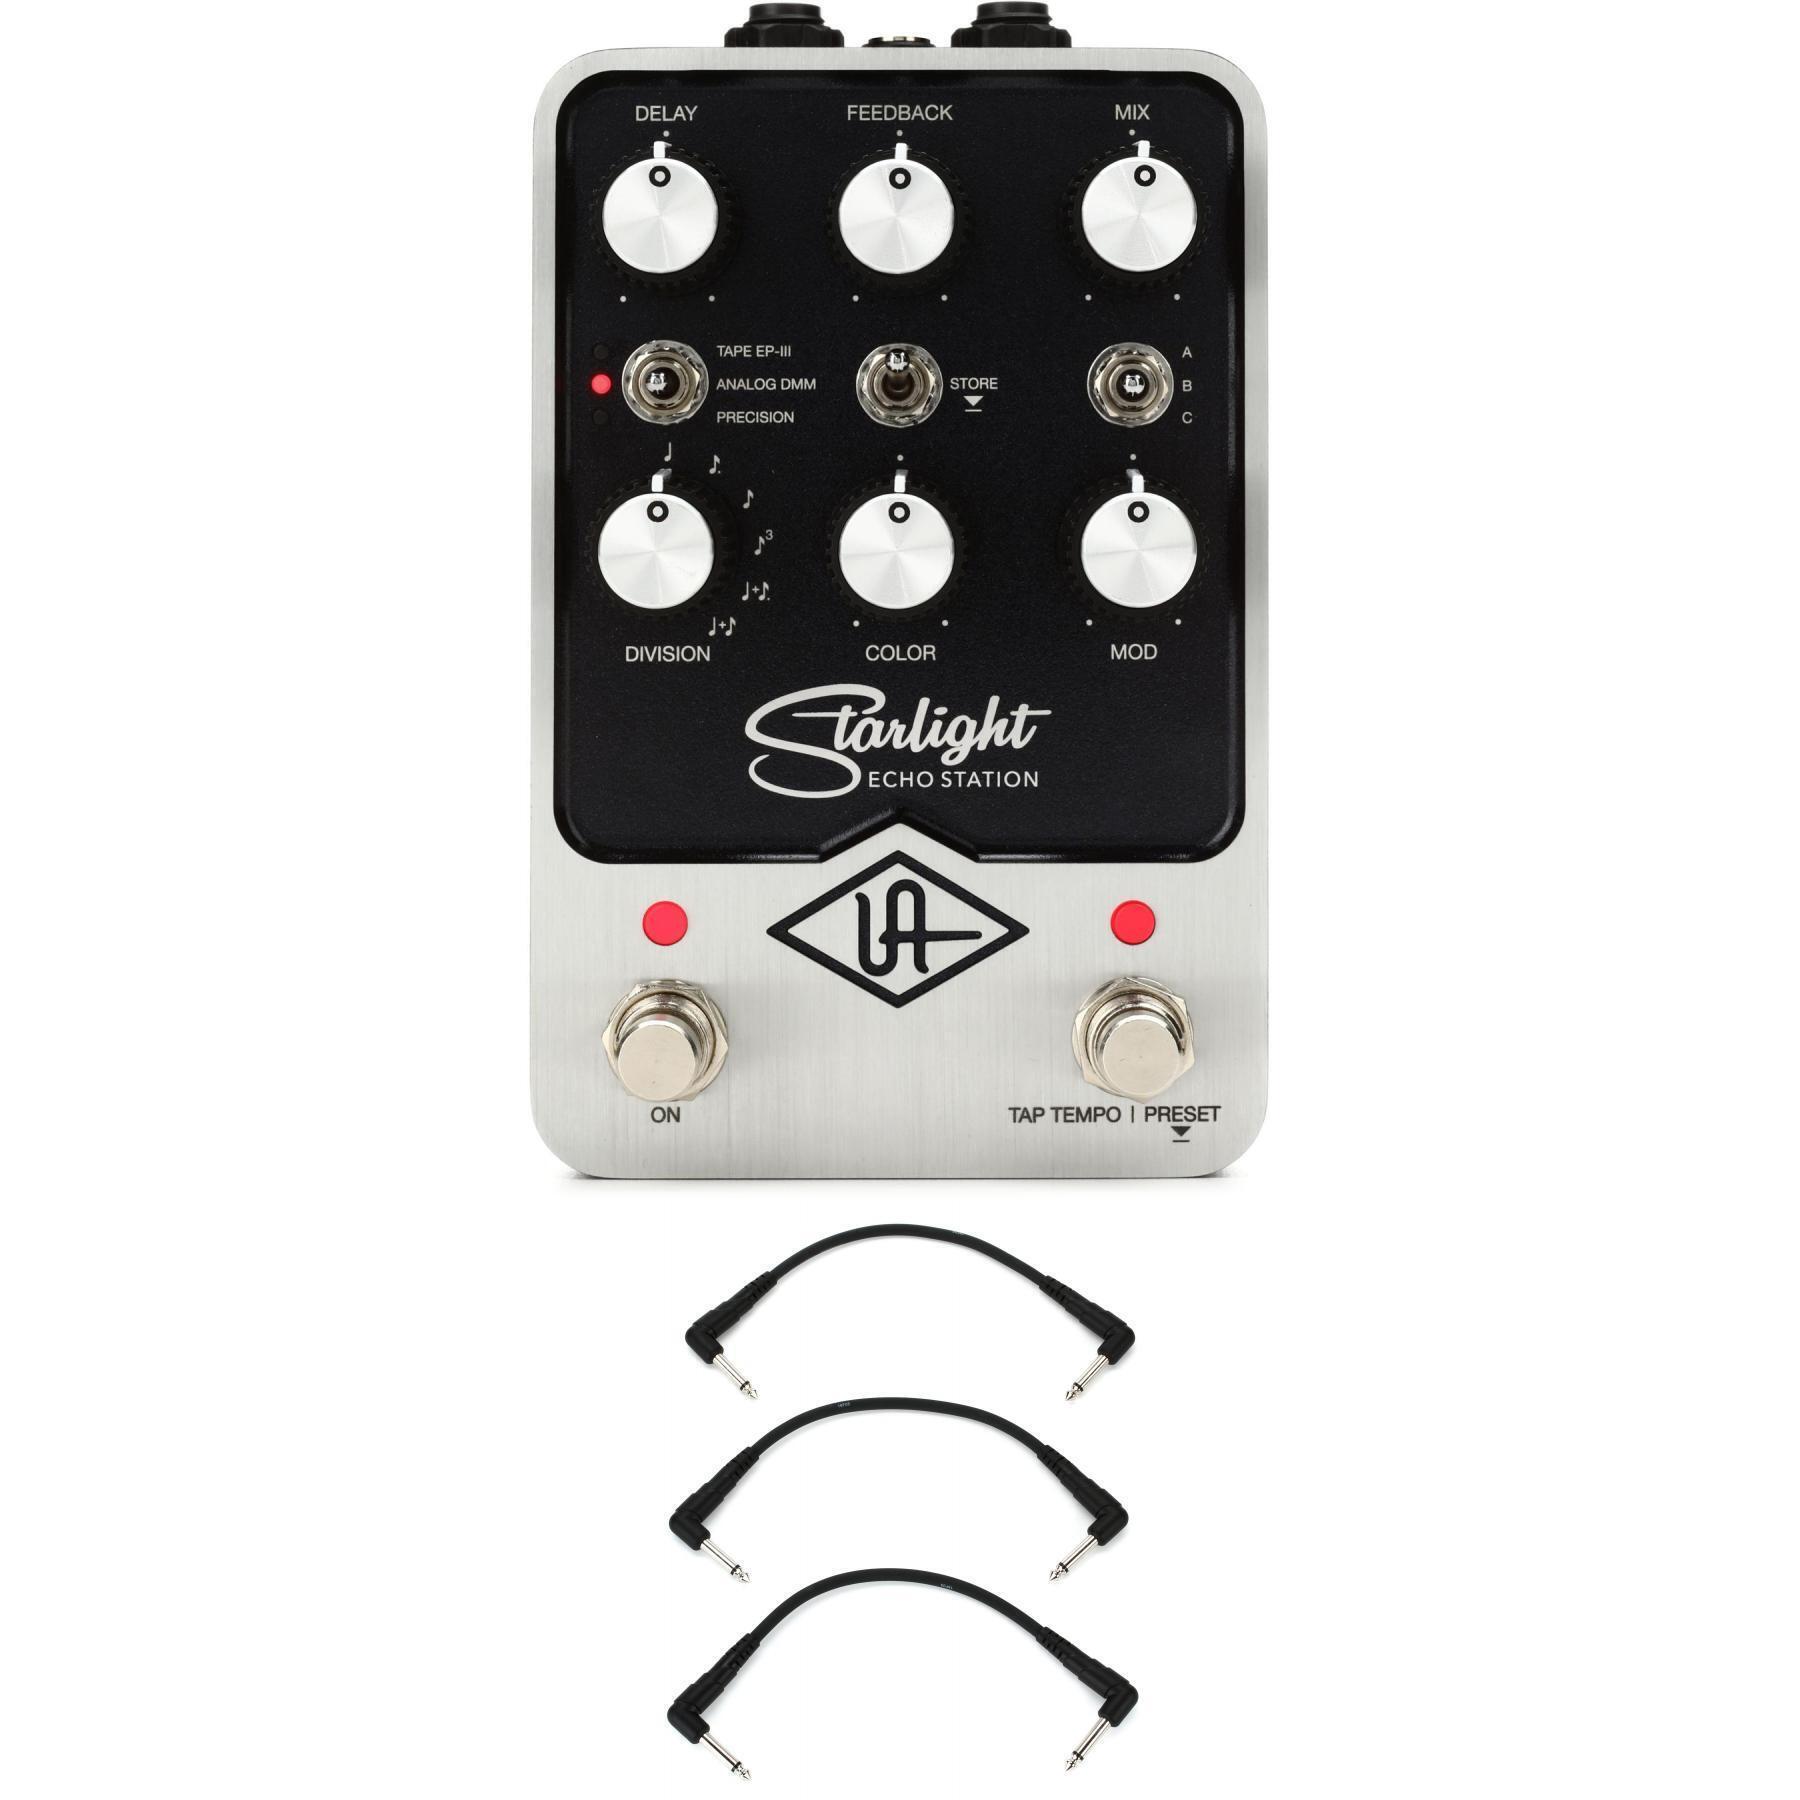 Universal Audio UAFX Starlight Echo Station Delay Pedal with 3